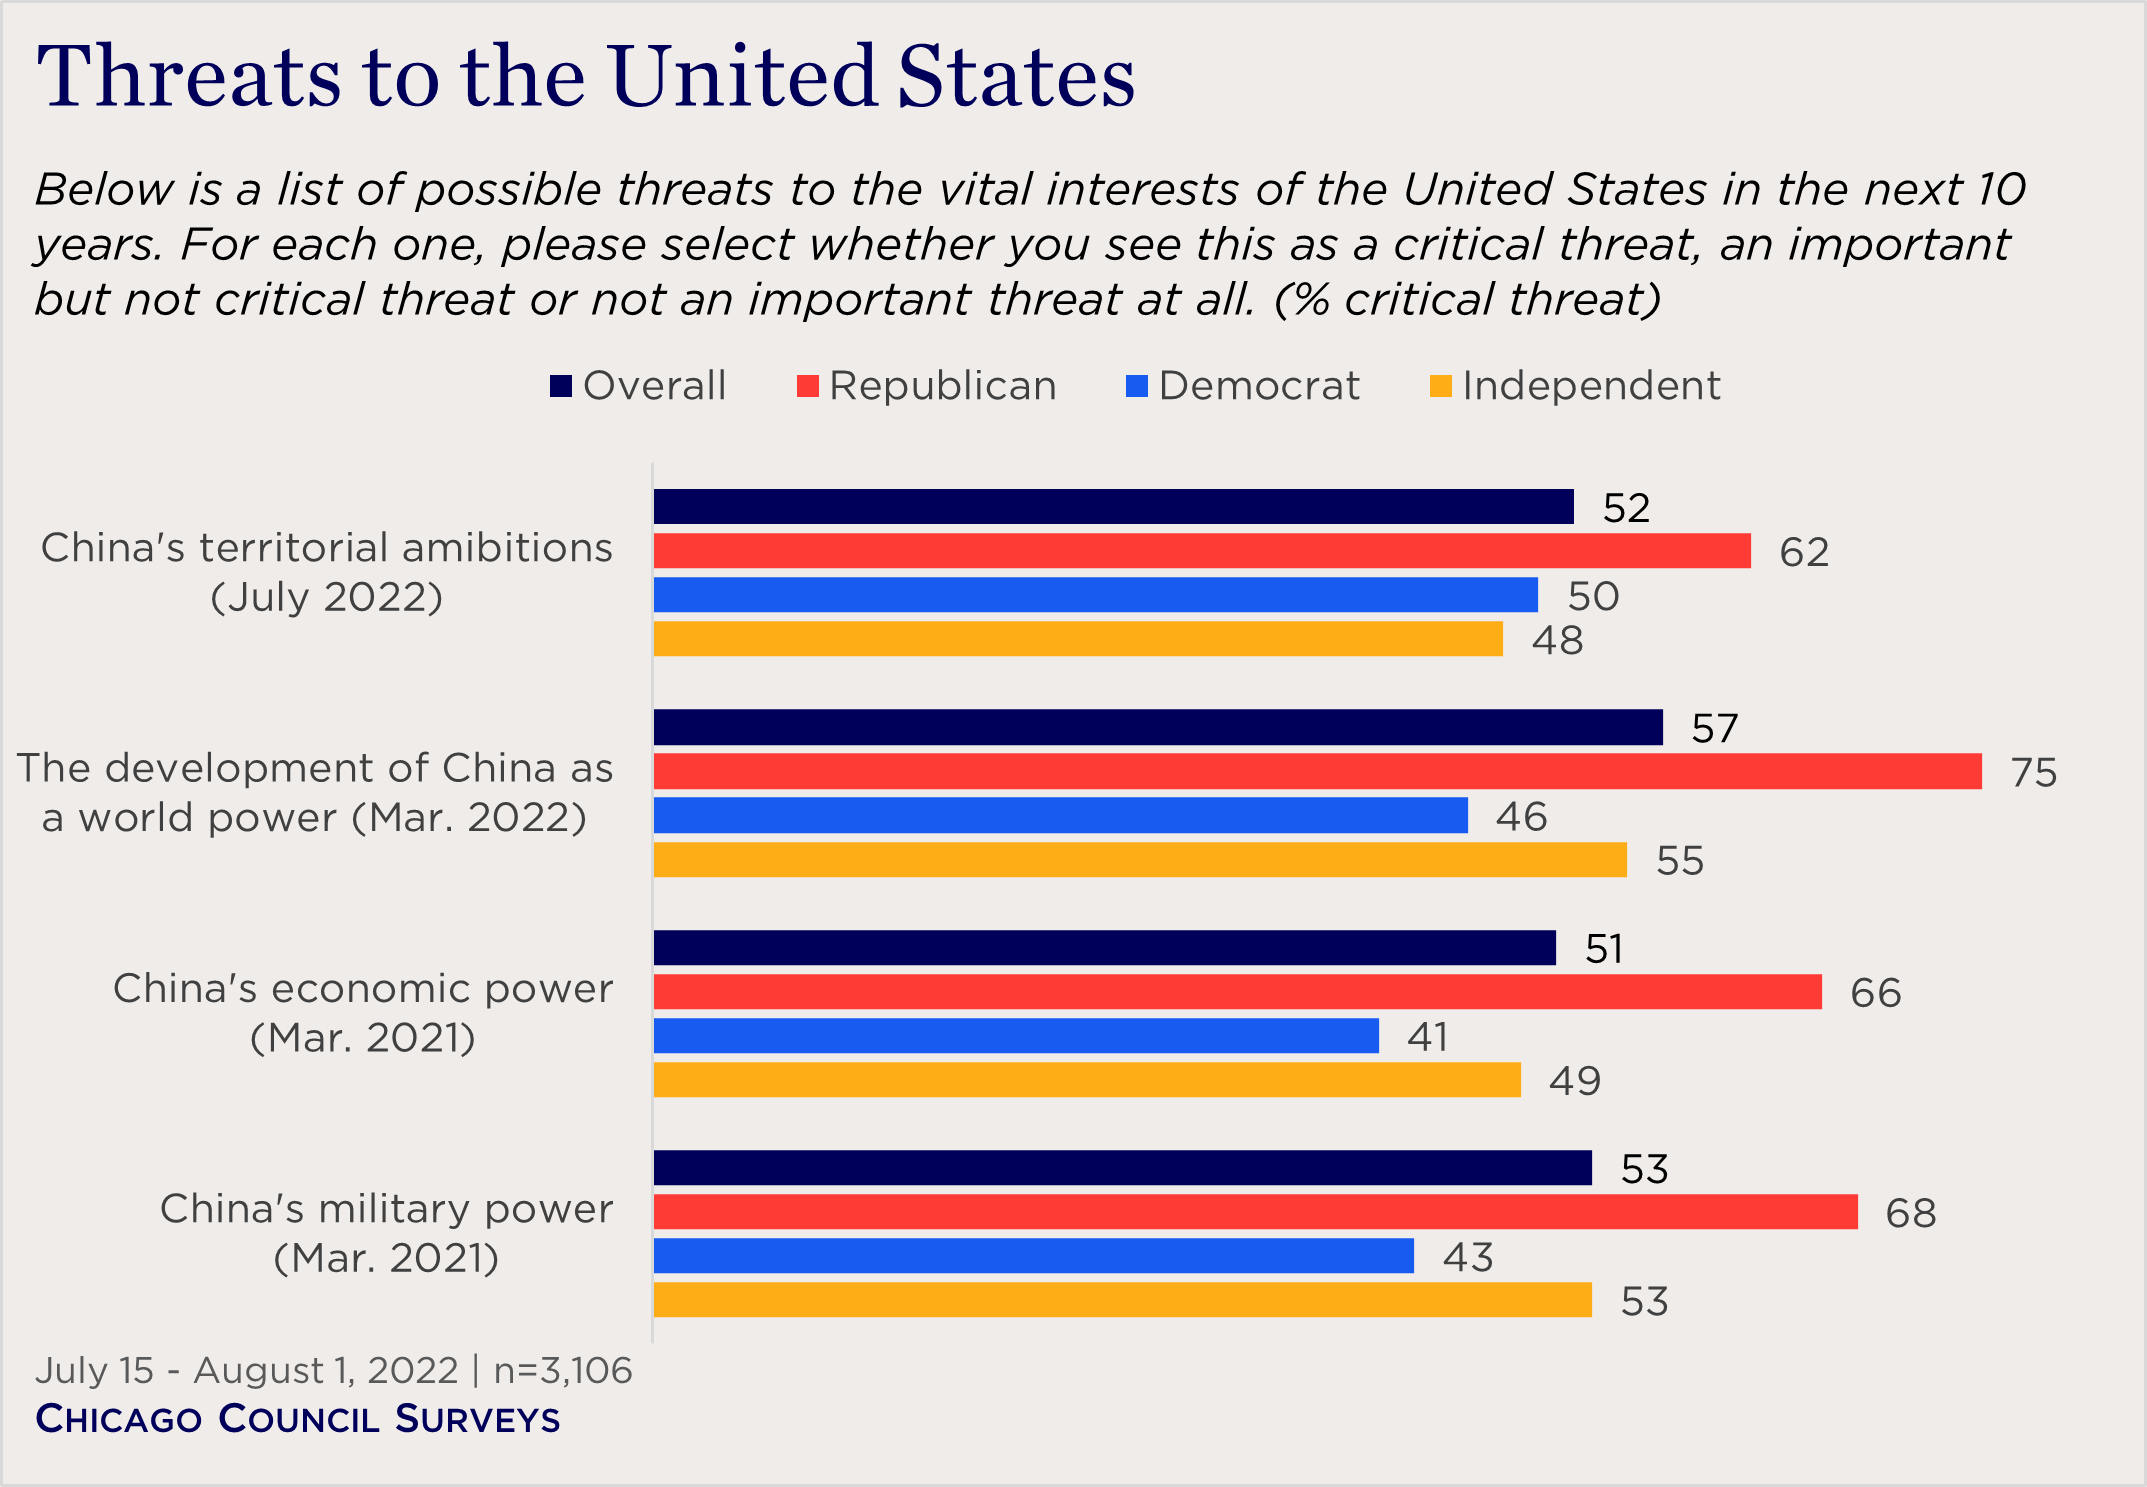 bar chart showing partisan views of threats to the United States